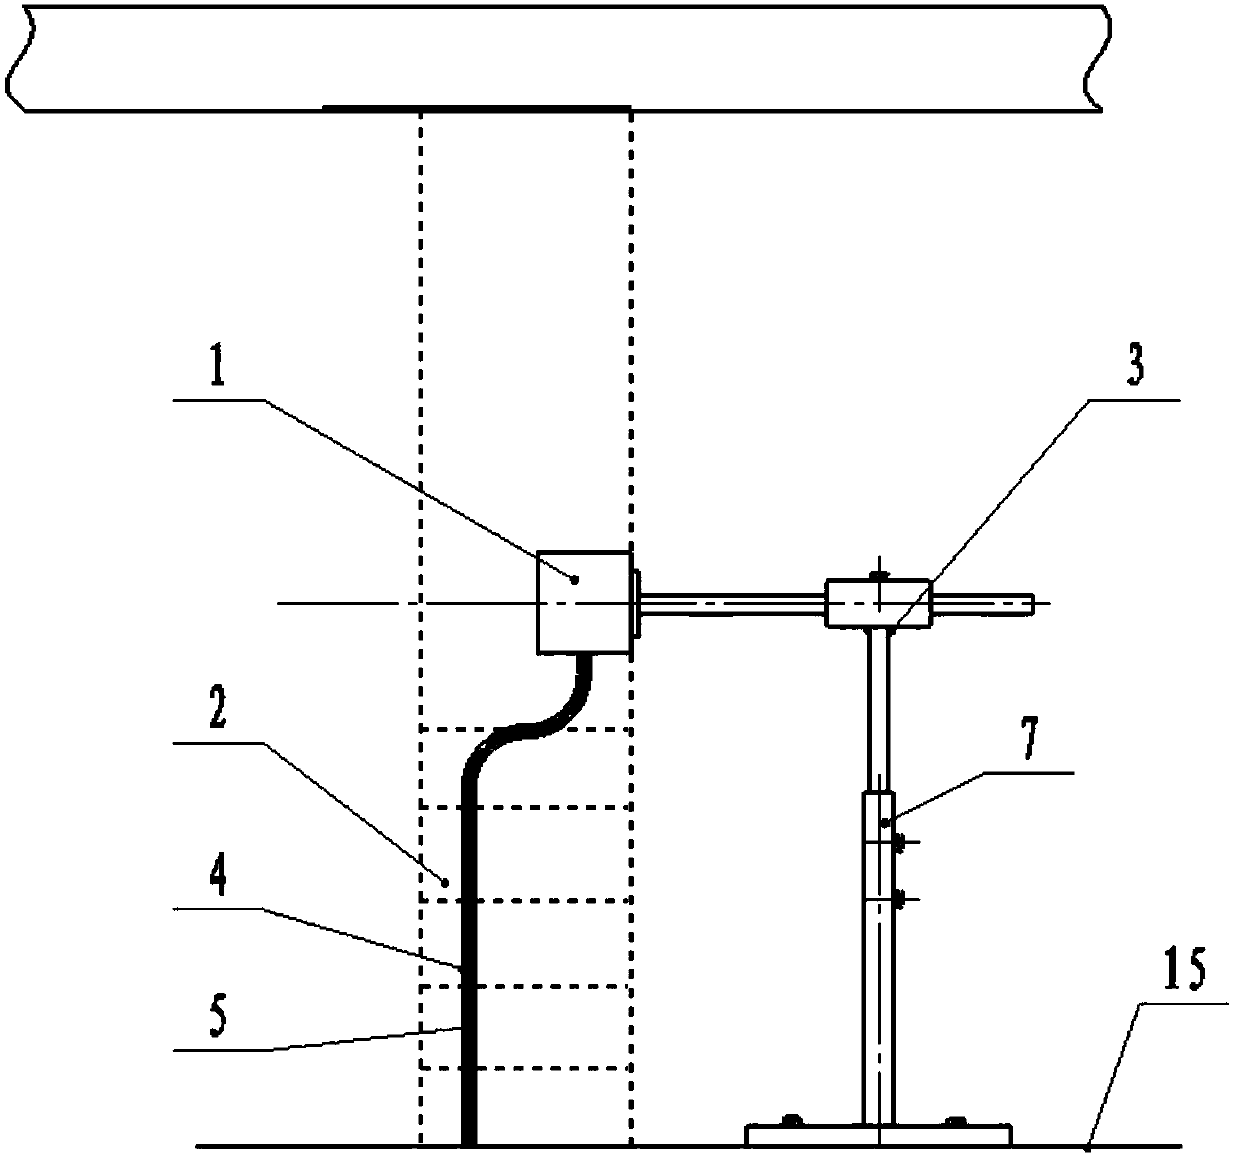 Construction method for building wire box mounting point construction frame